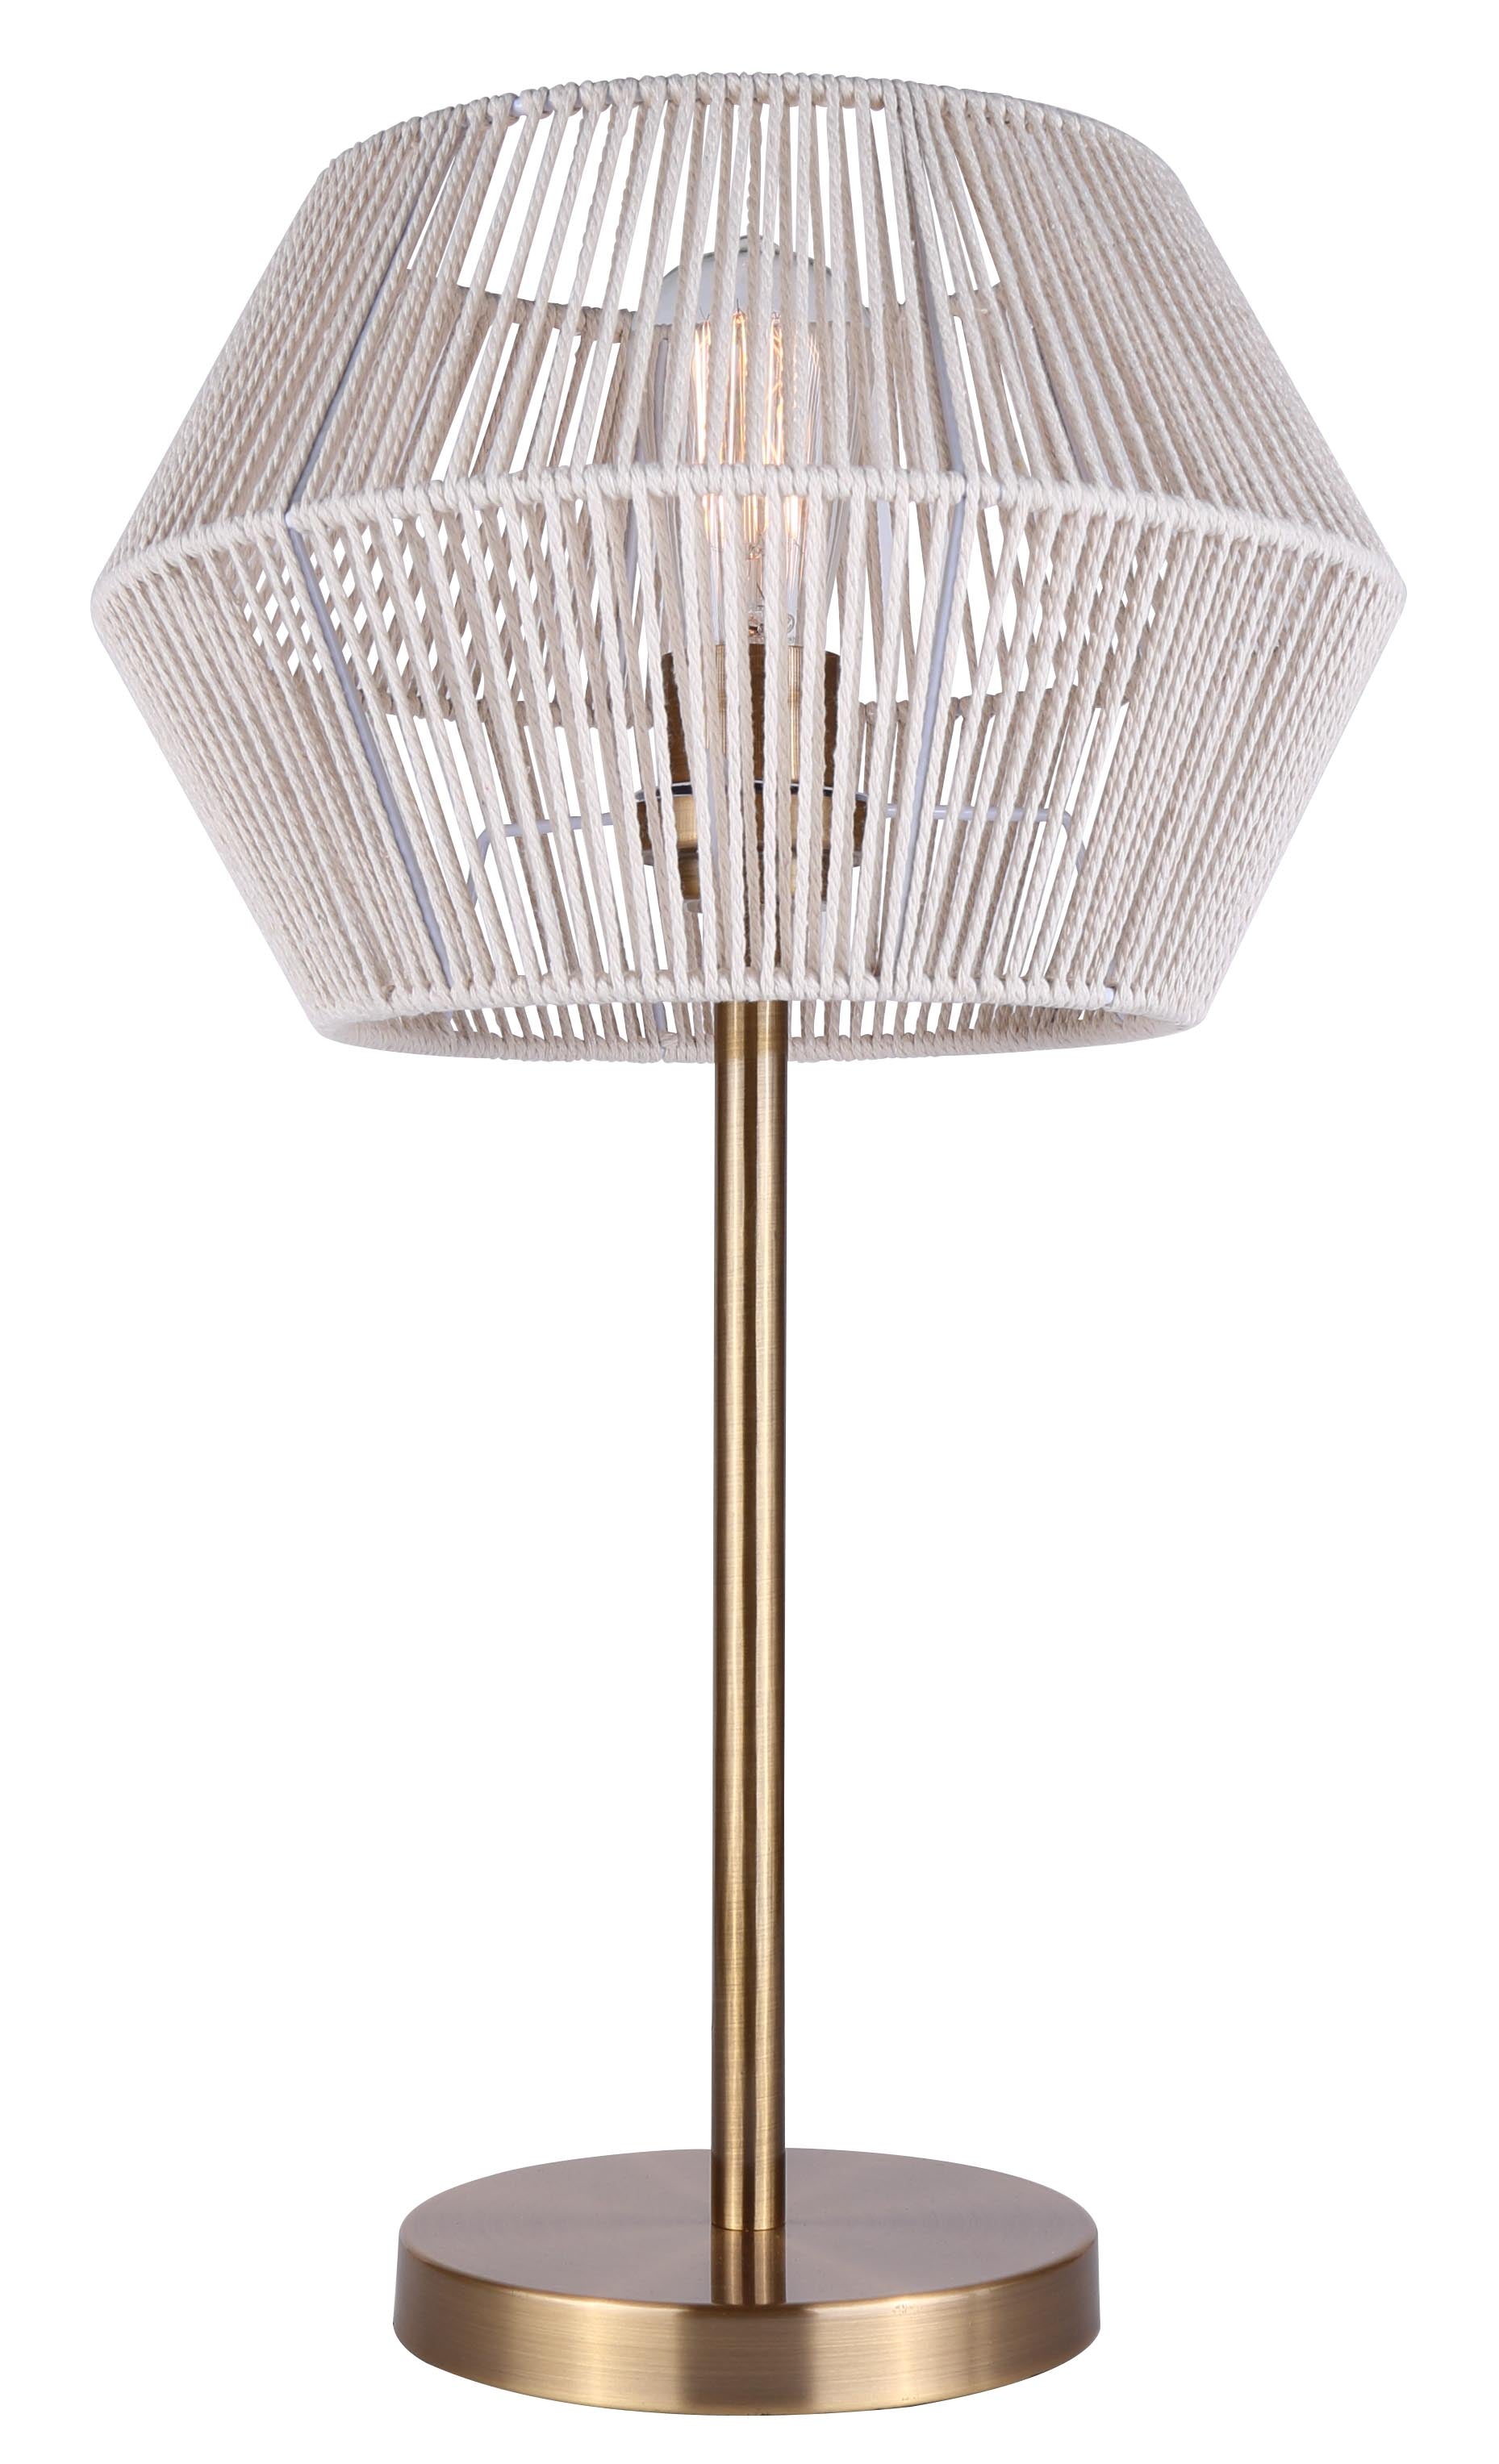 WILLOW Lampe sur table Or - ITL1120A22GD | CANARM